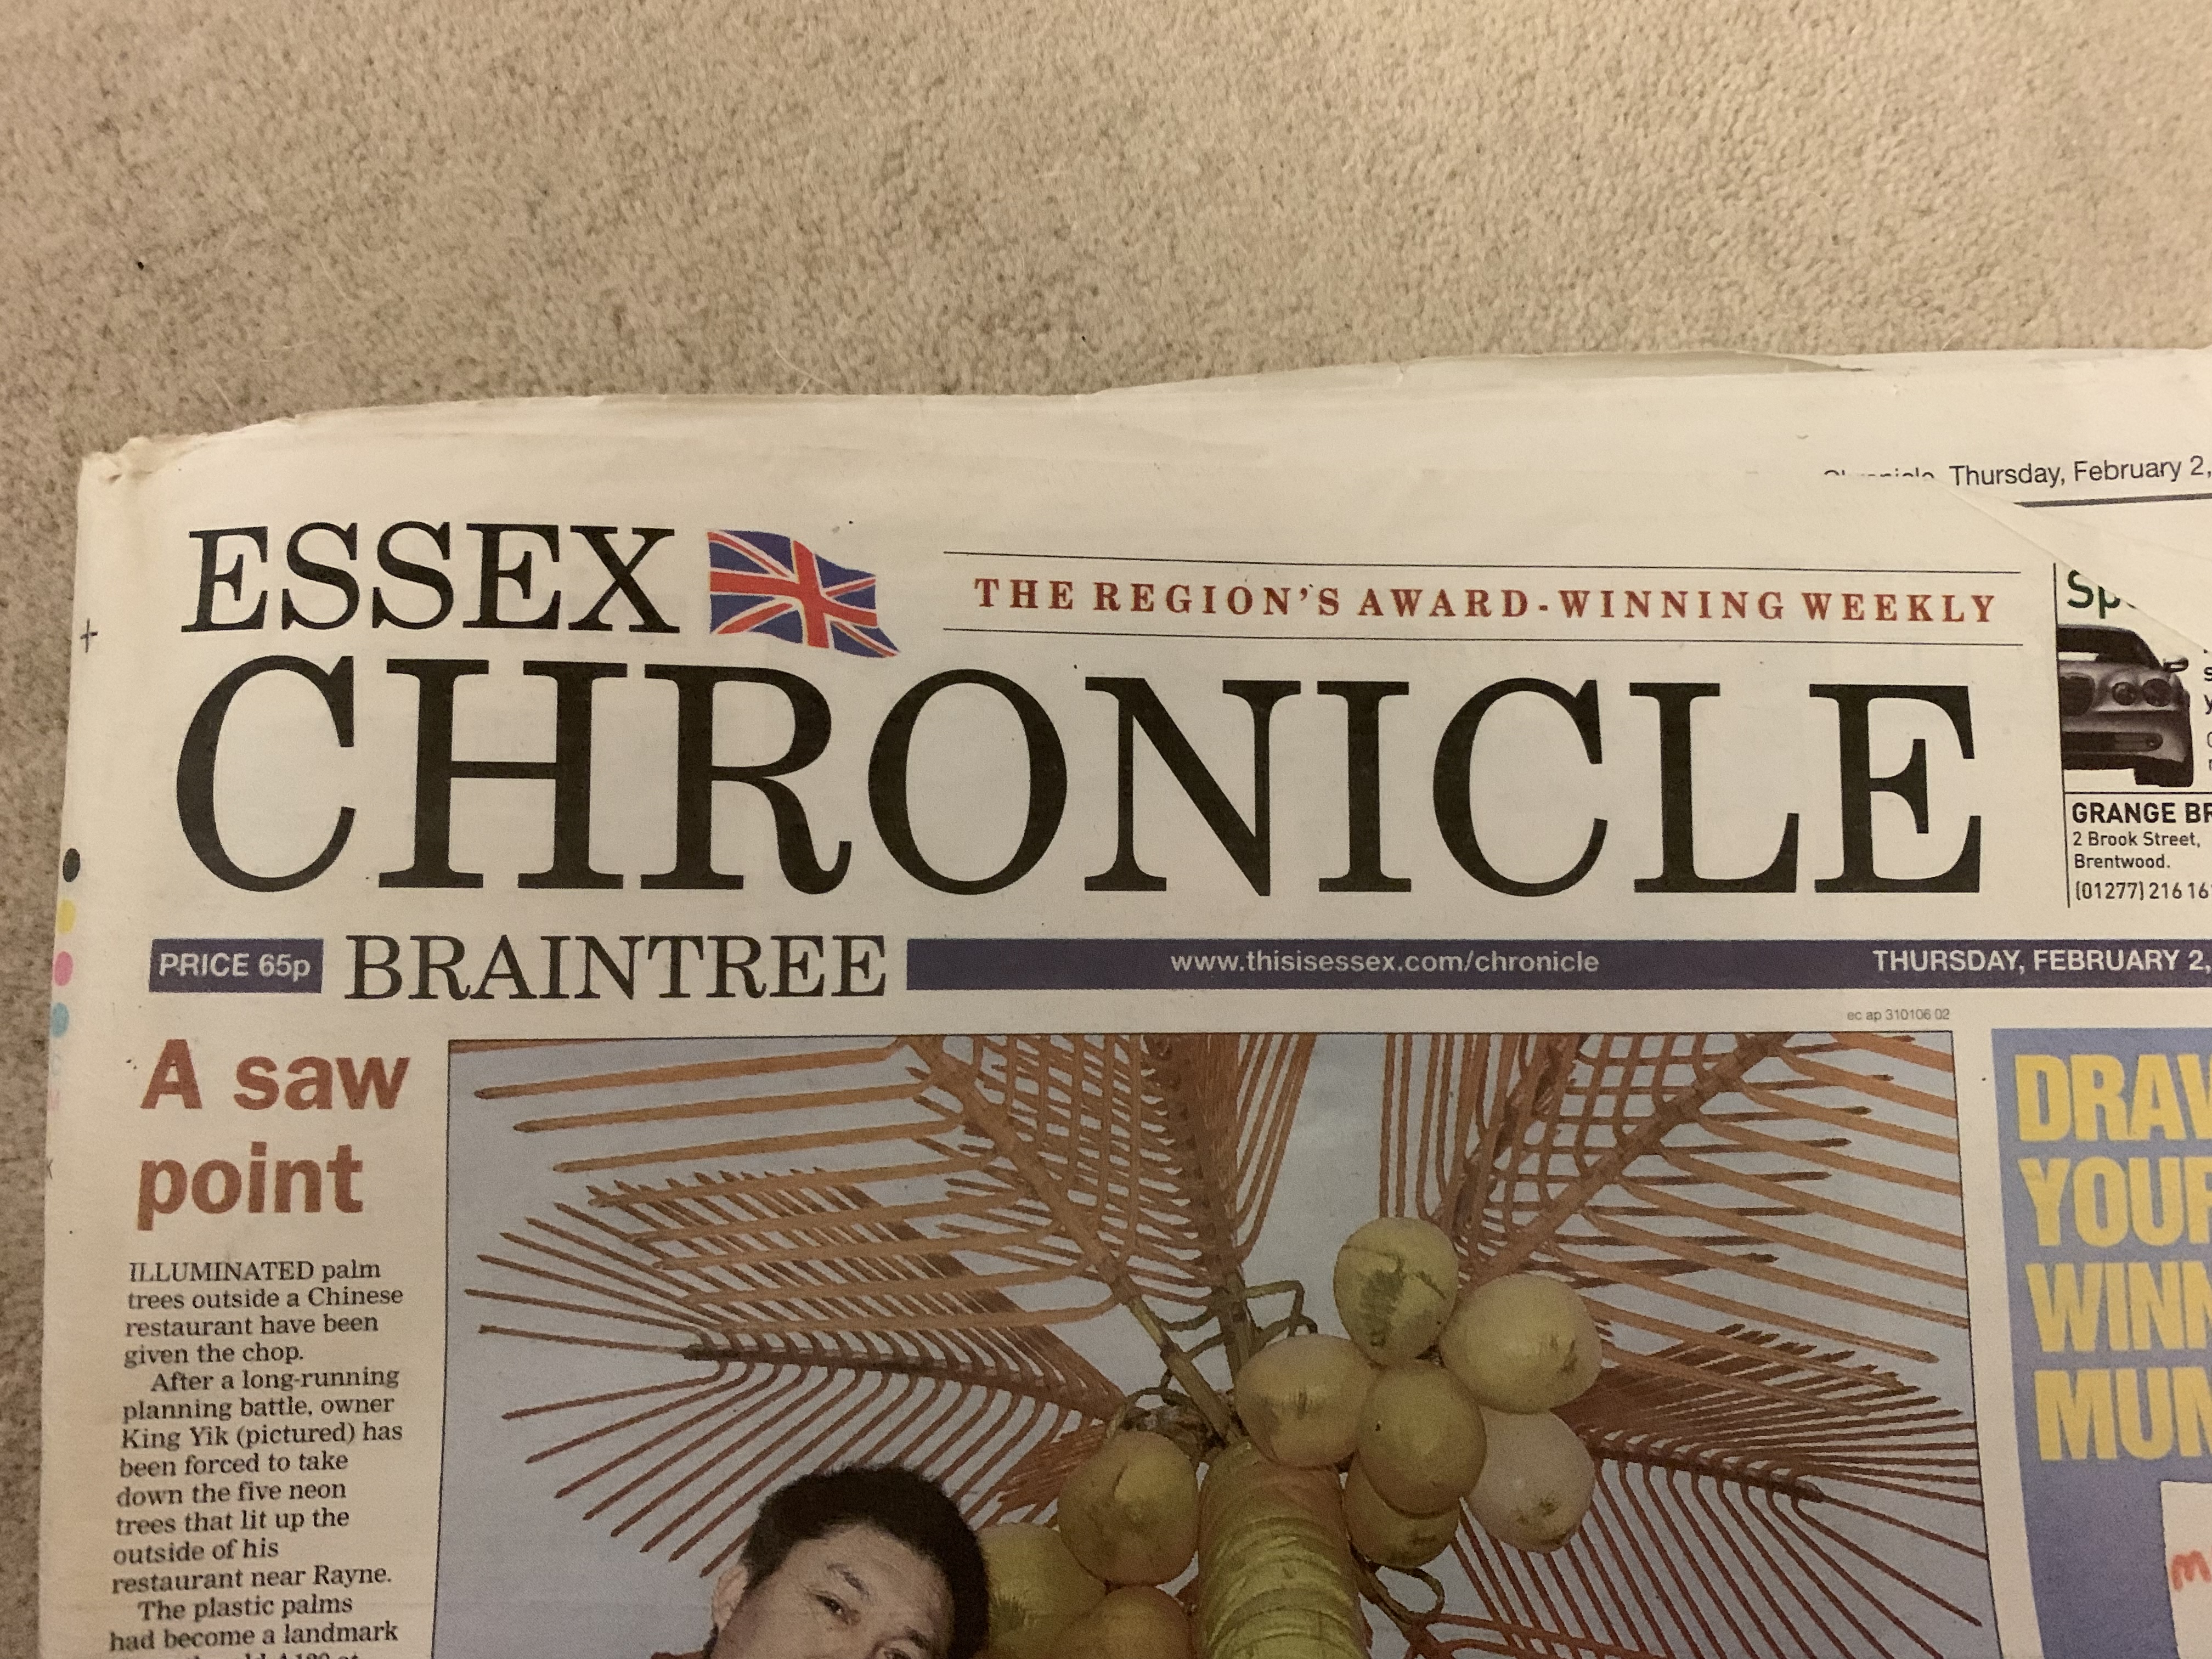 Essex Chronicle - Thursday 2nd February 2006 - Gay Marriage / Civil Partnership